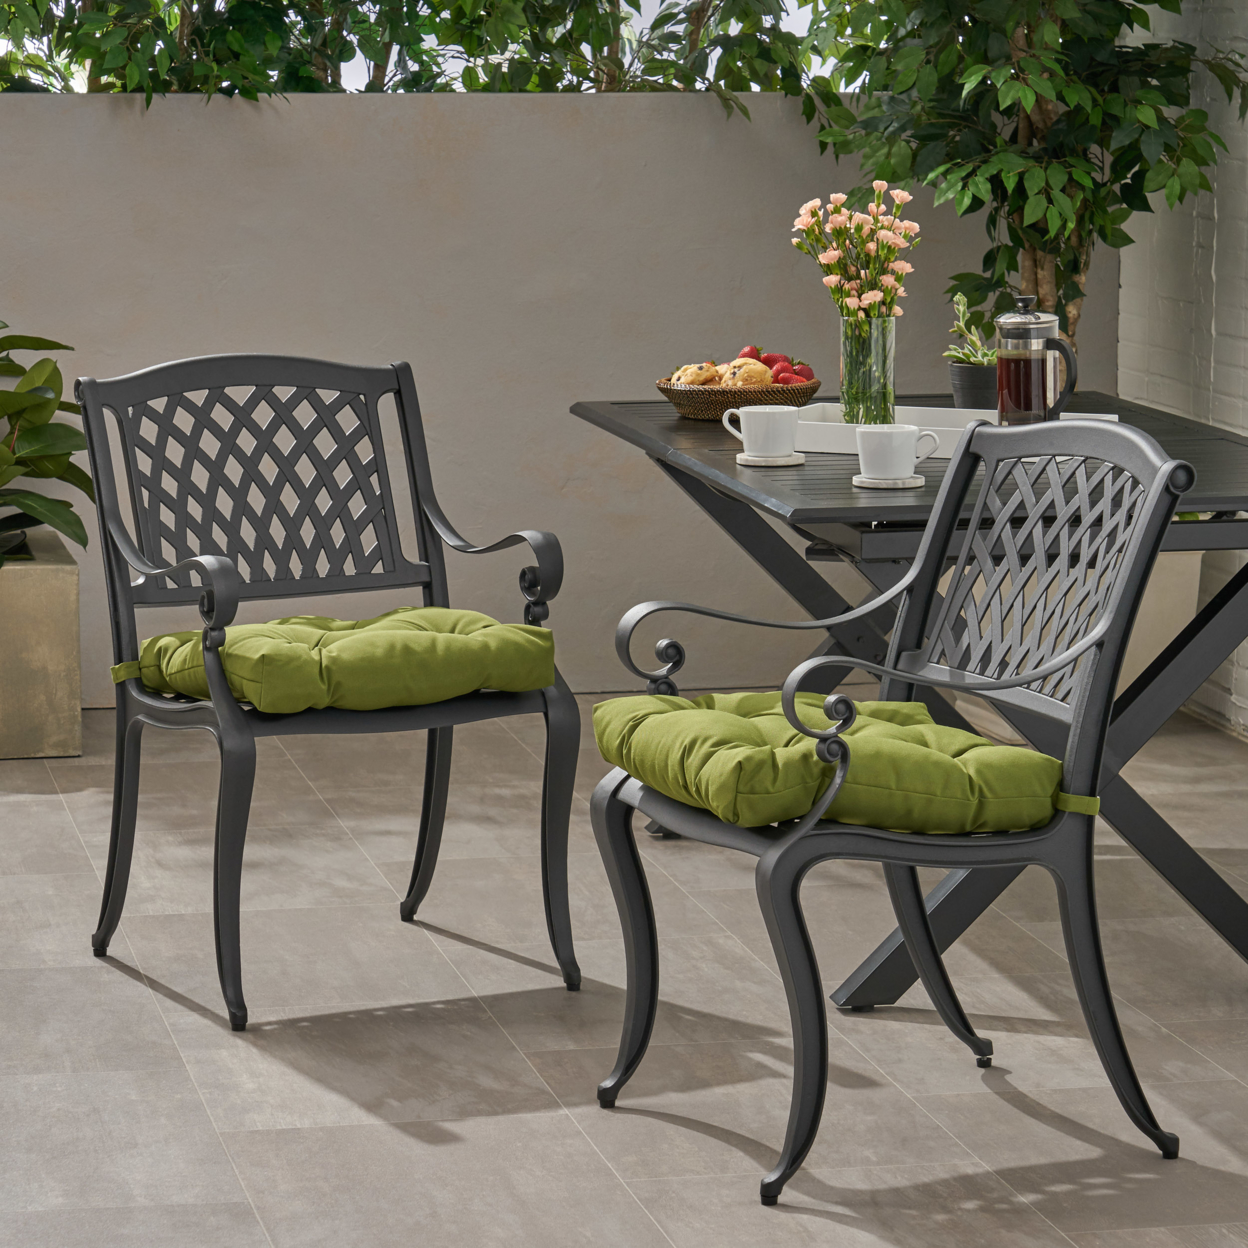 Gladys Outdoor Dining Chair With Cushion (Set Of 2) - Antique Matte Black + Charcoal